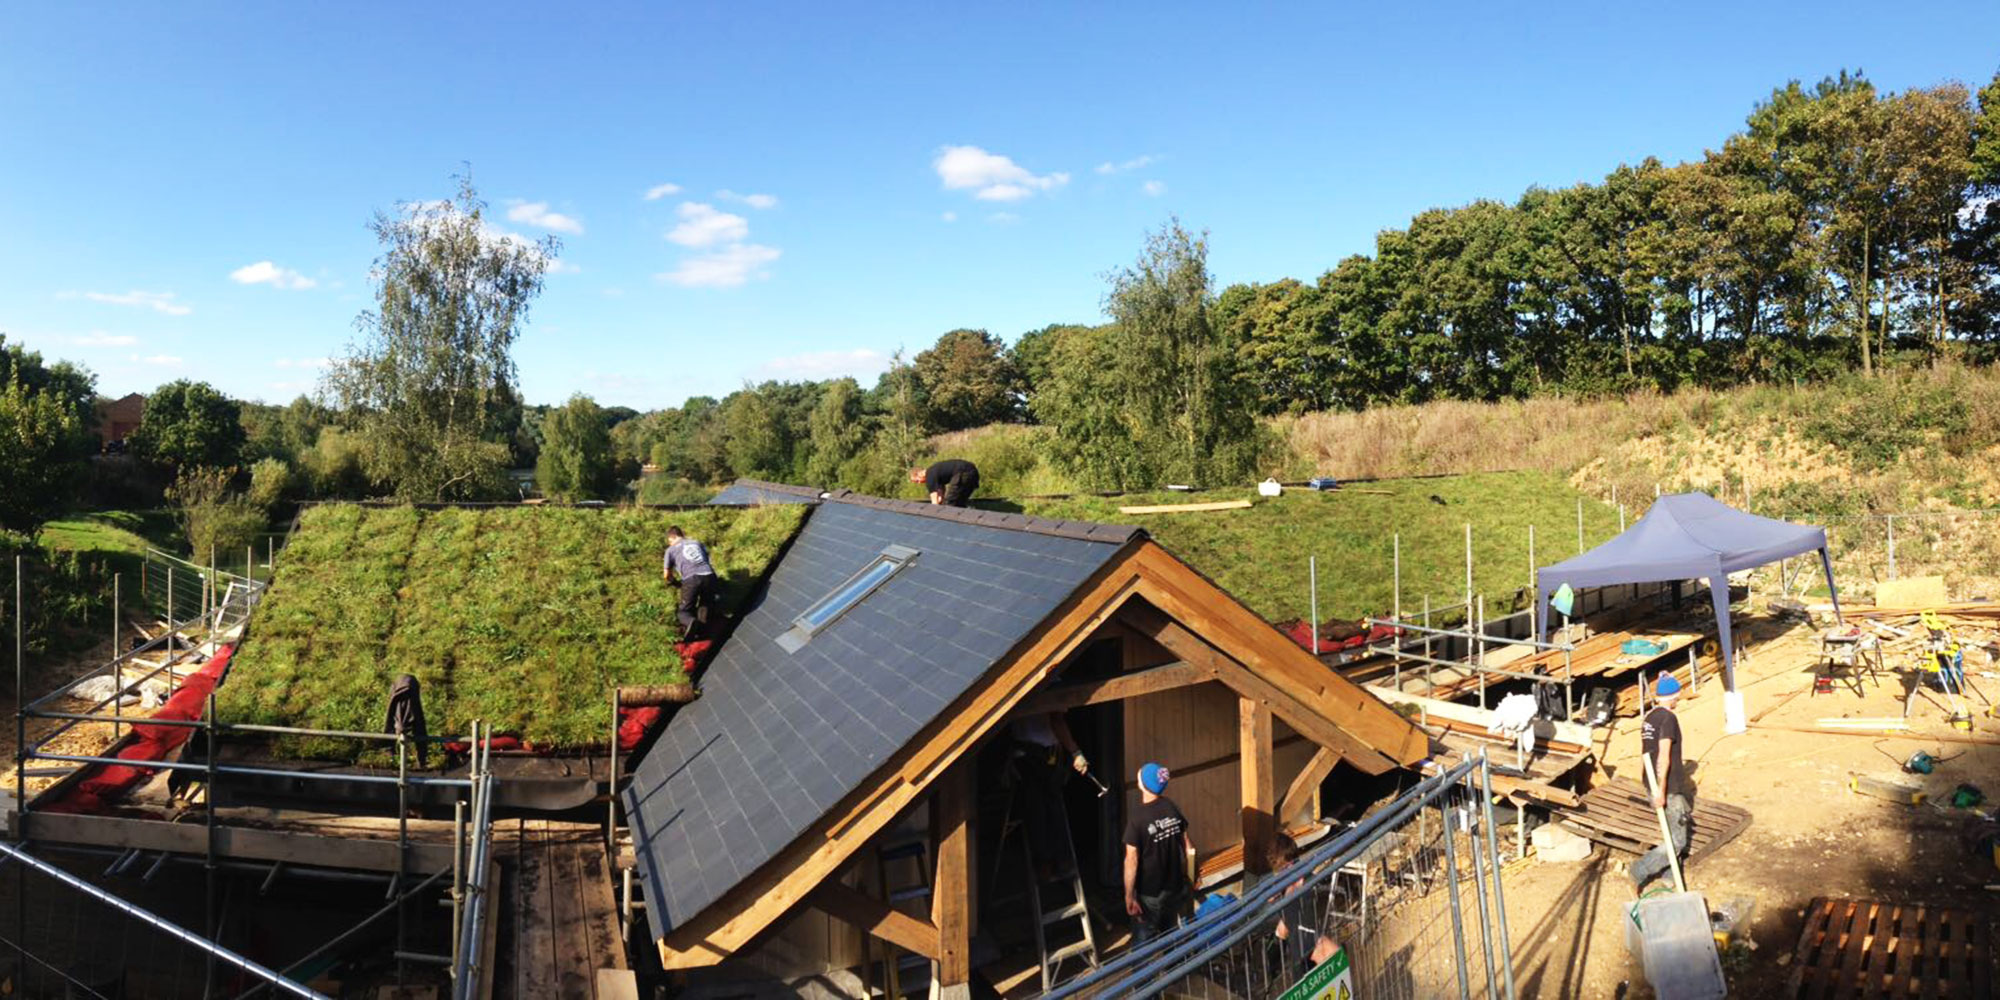 Want to know what sort of roof can support a green roof installation?